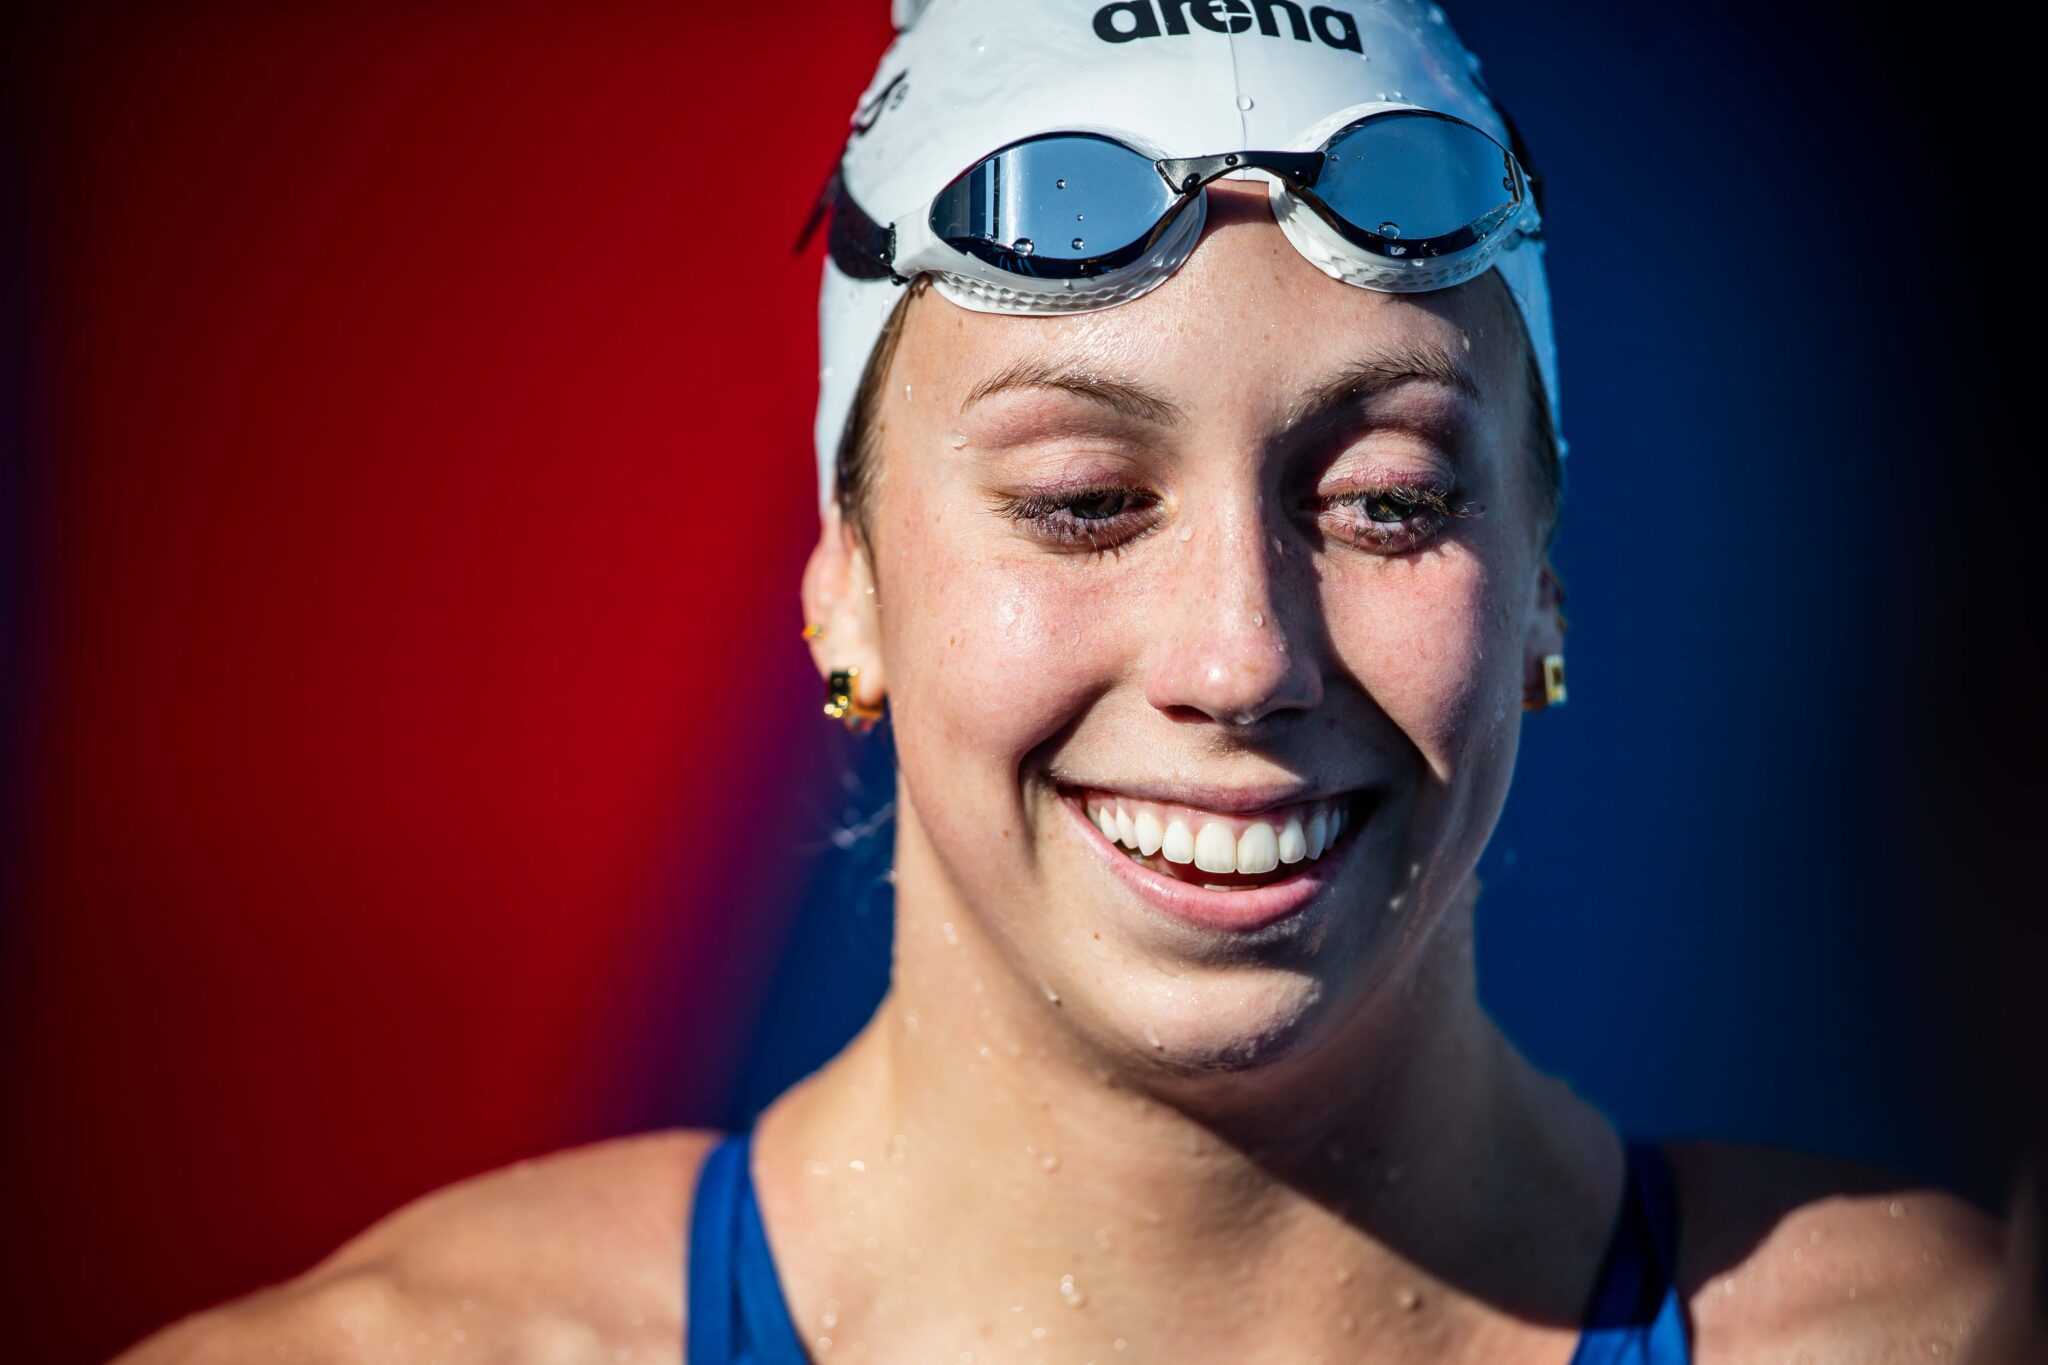 Gretchen Walsh's Historic Breakthrough at U.S. Olympic Team Trials